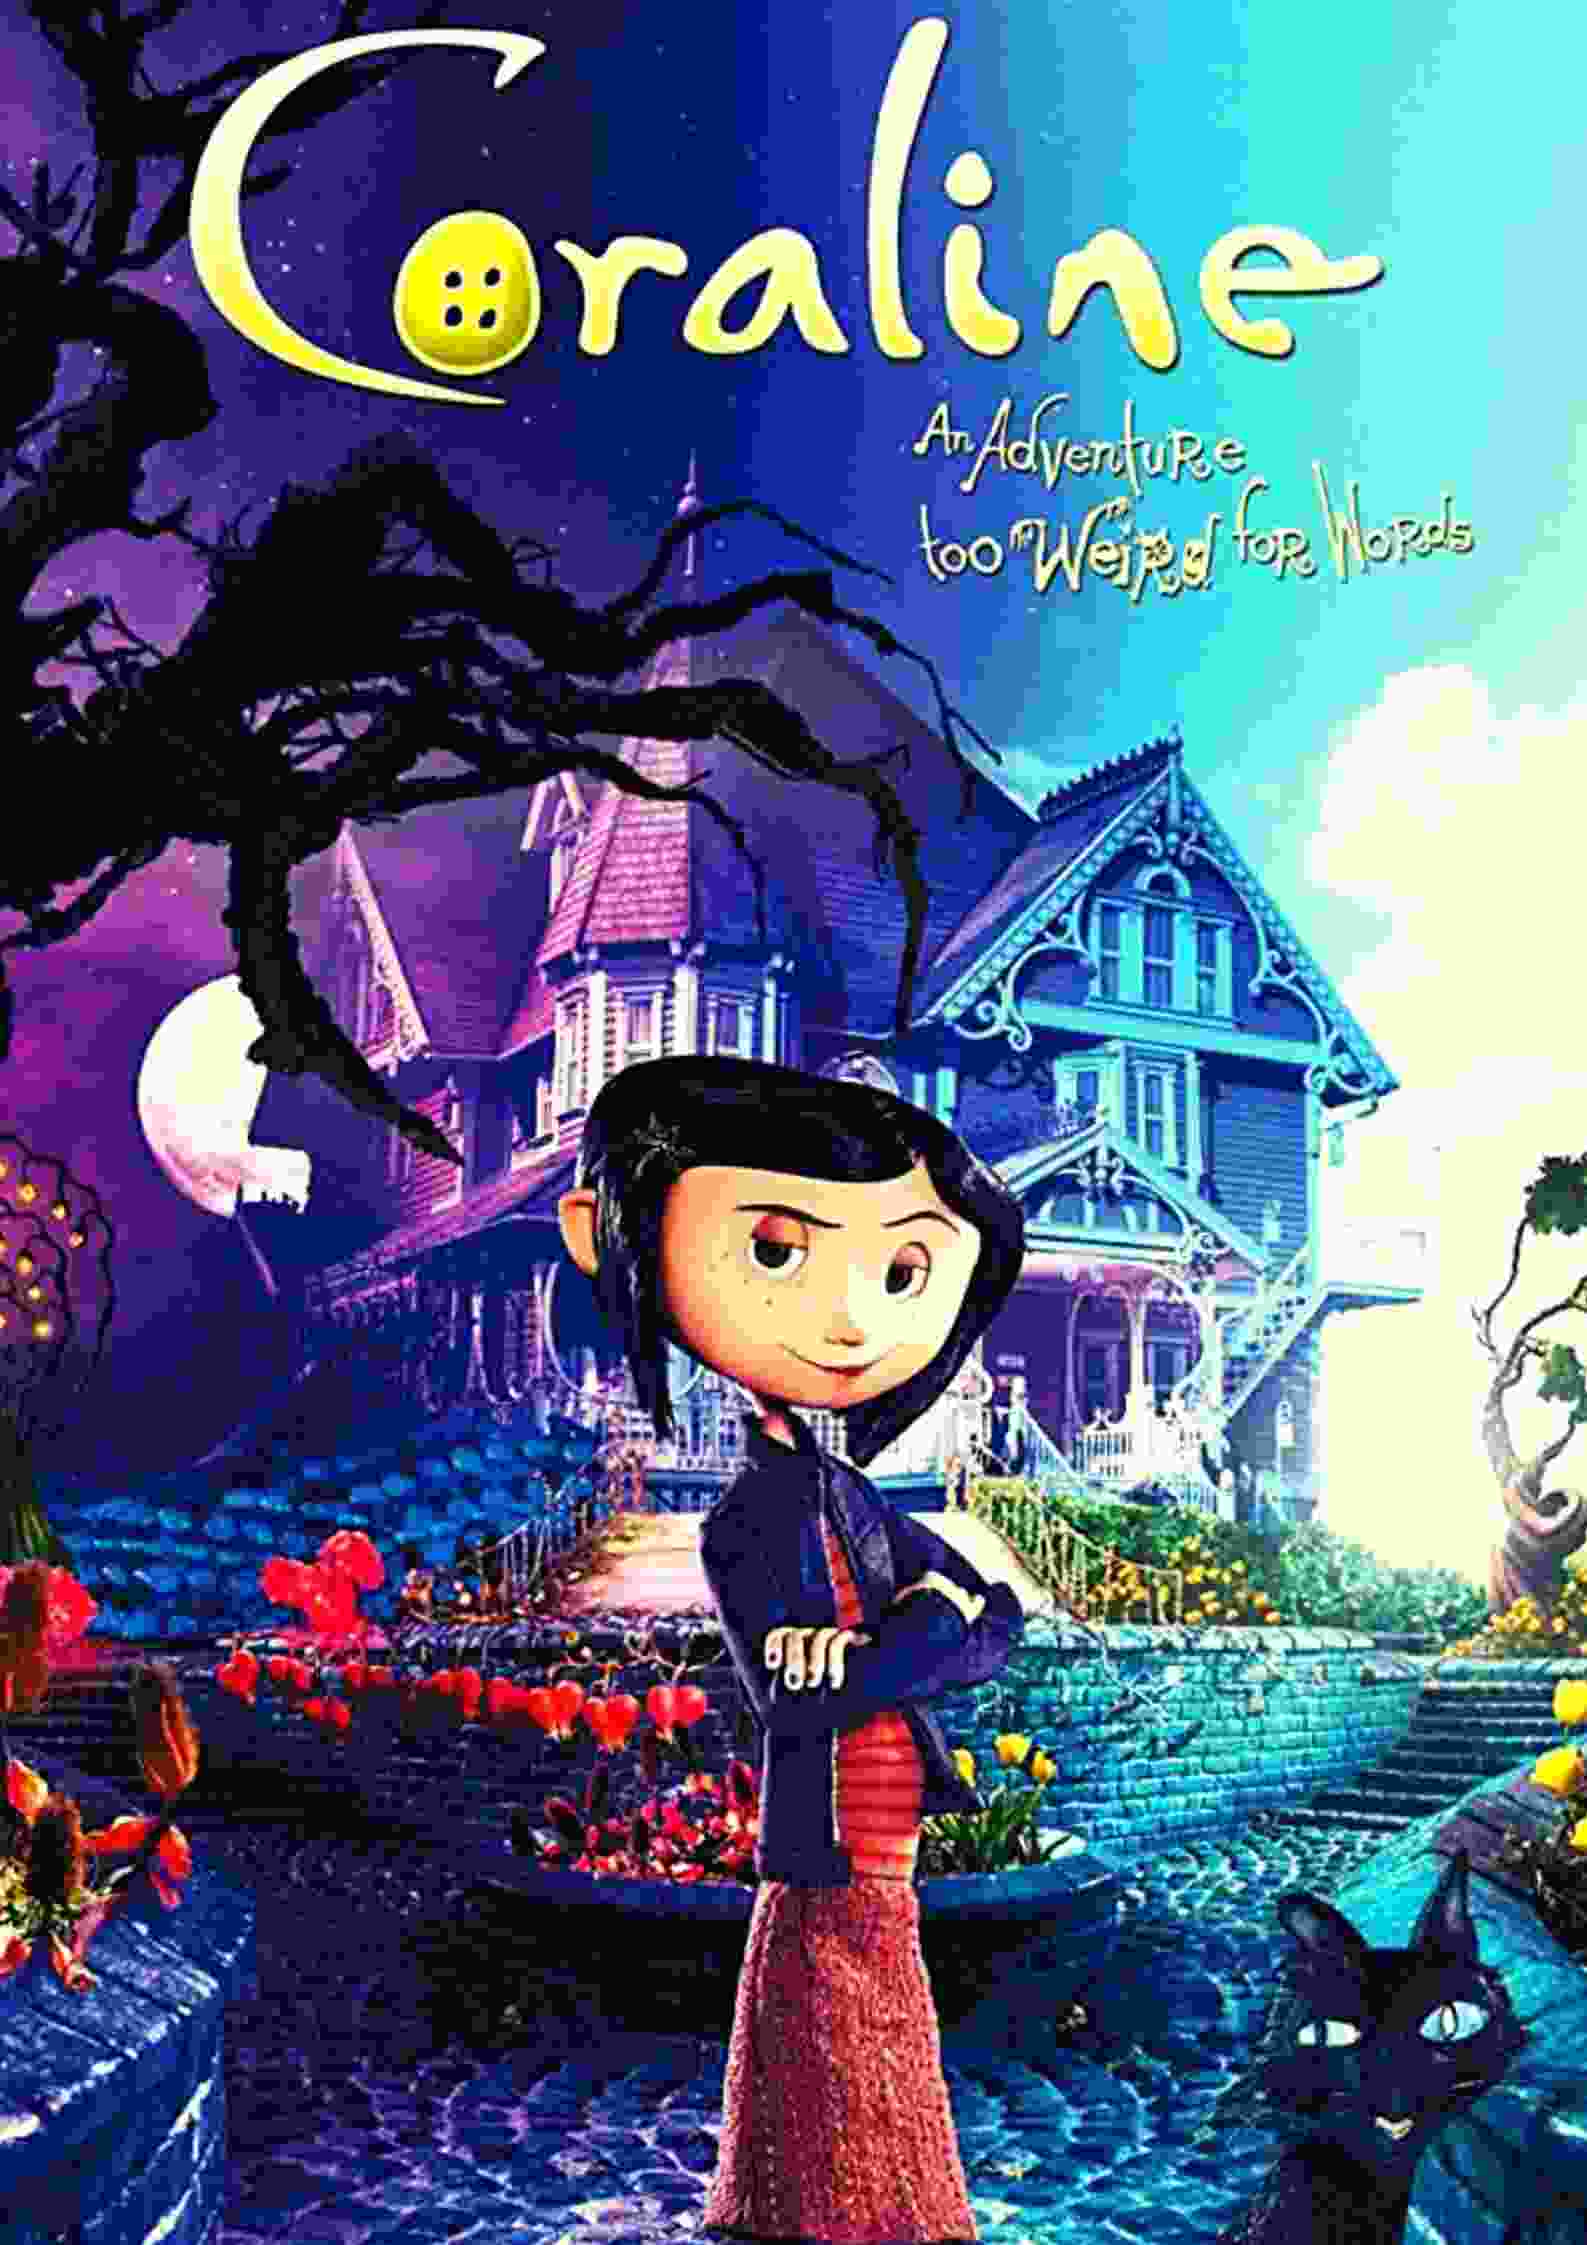 Coraline Parents Guide And Age Rating | 2009